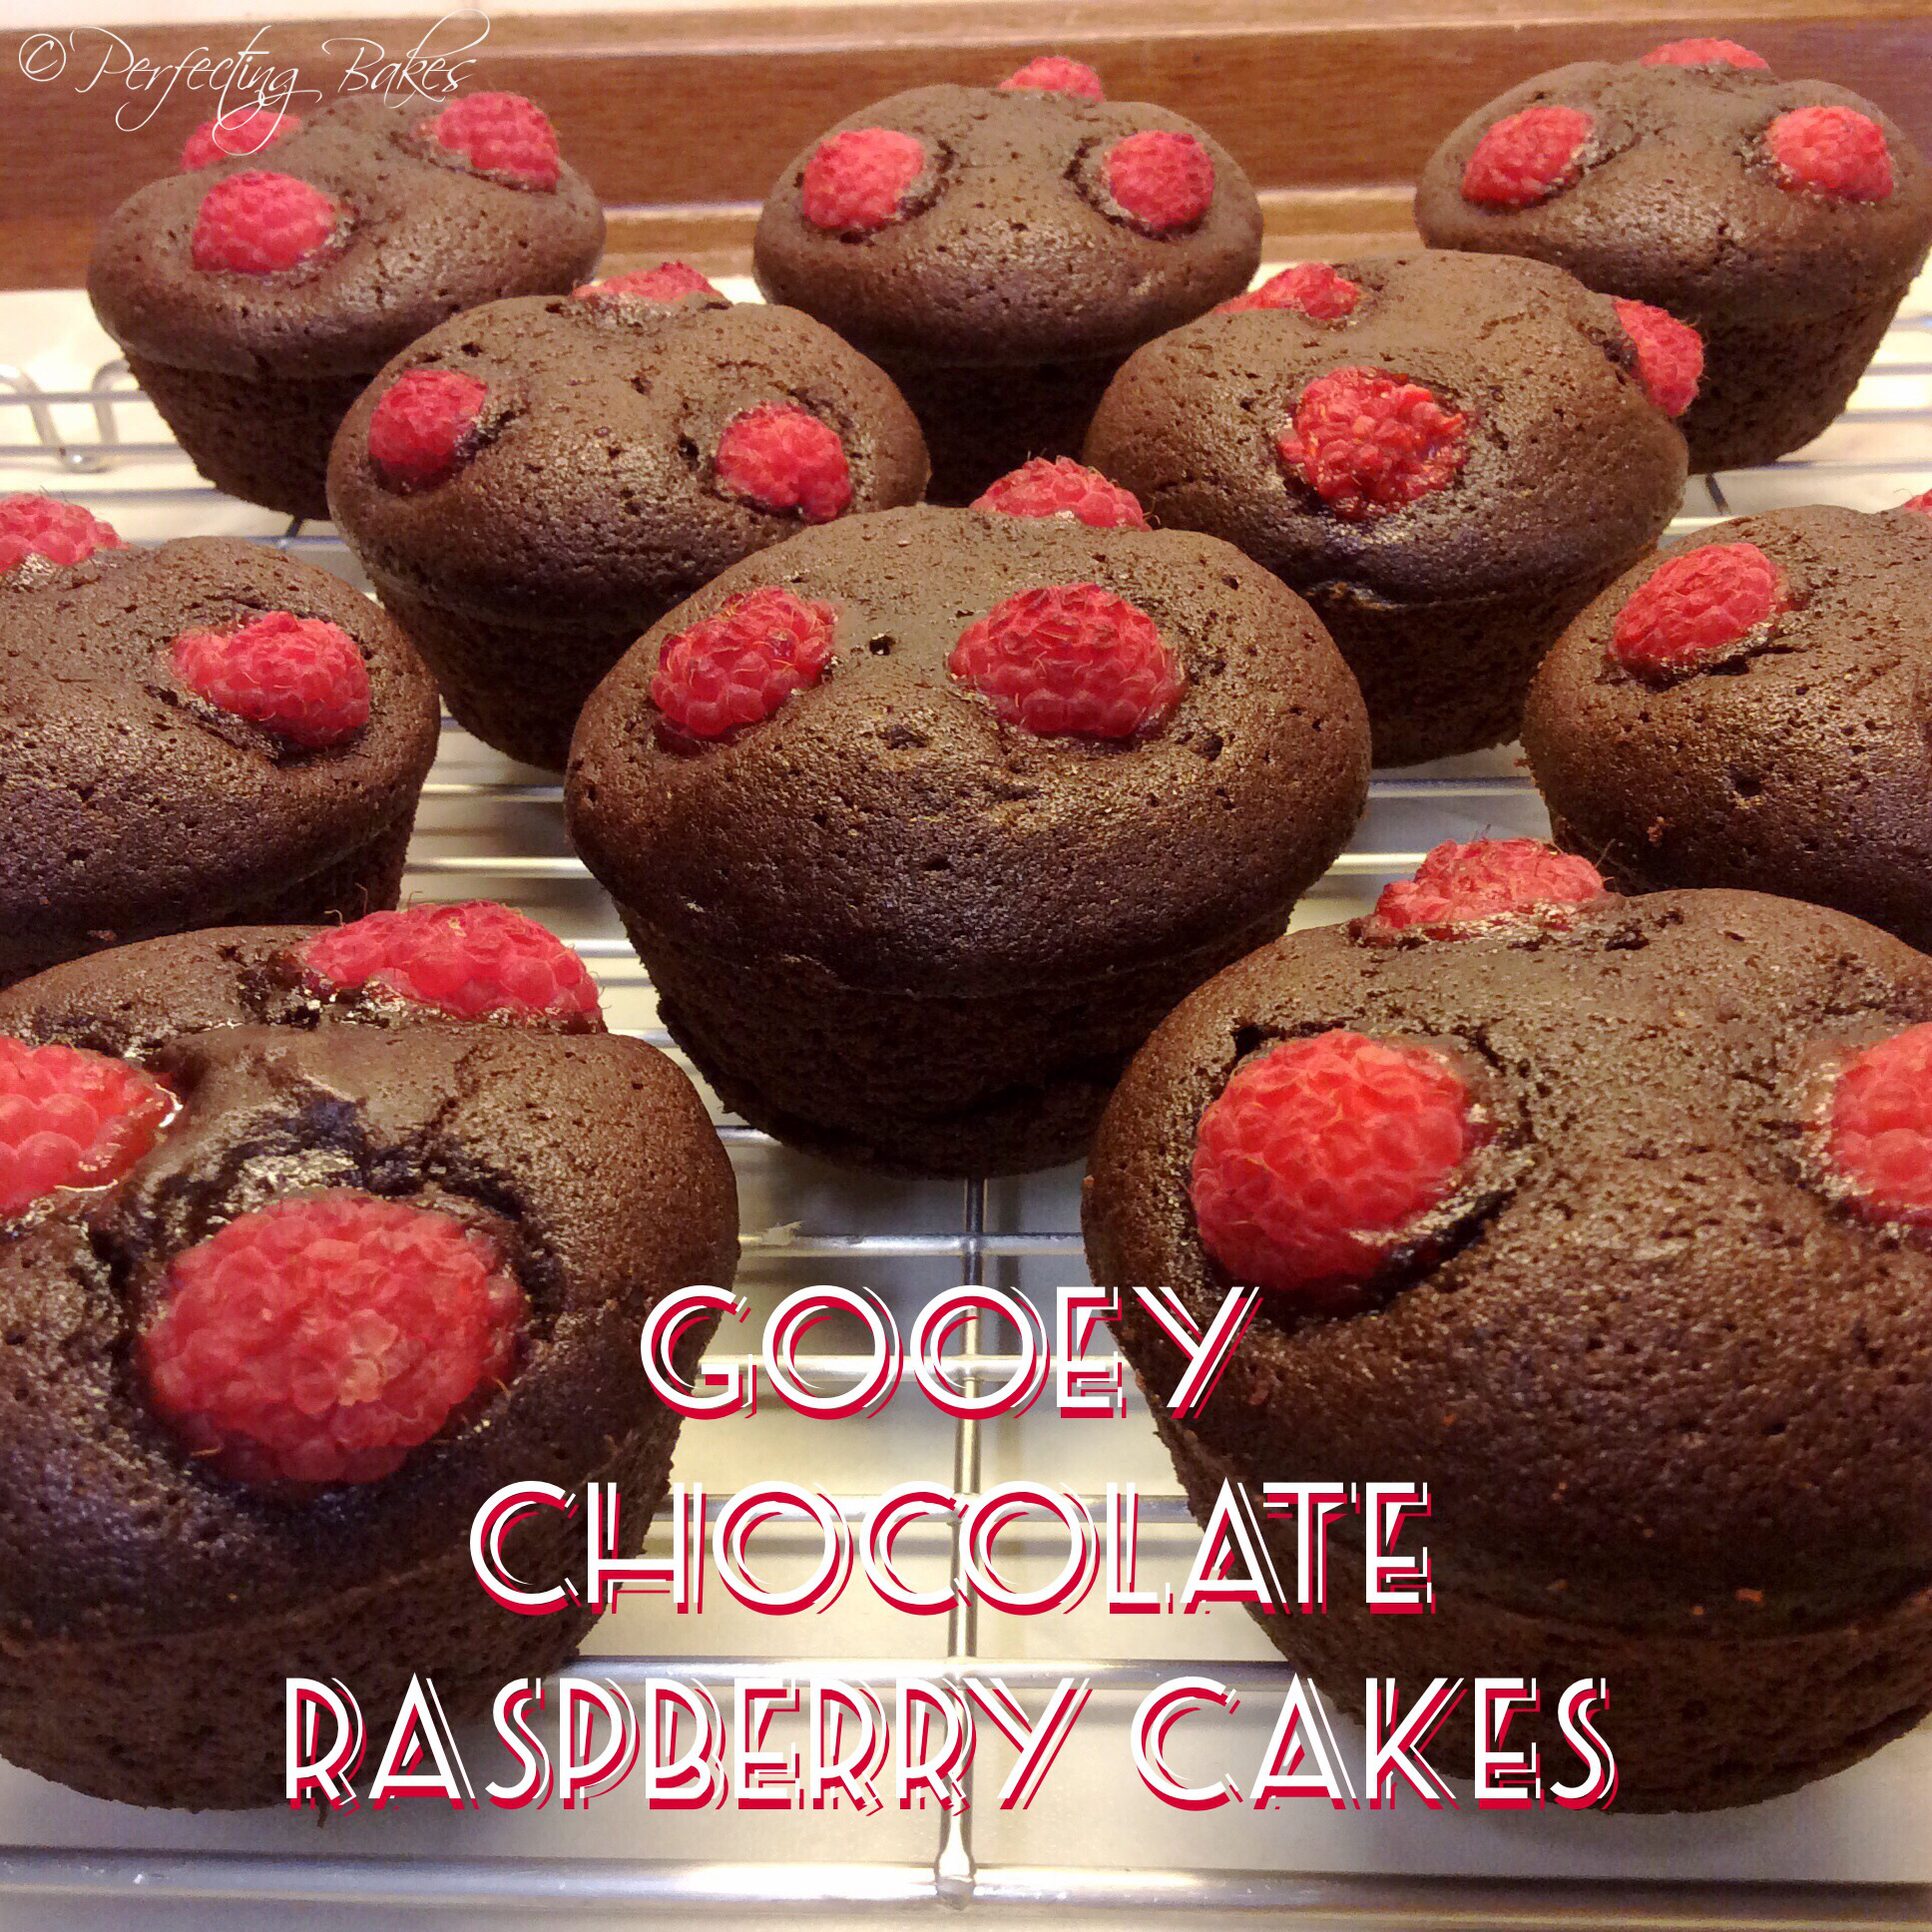 butter Perfecting Bakes  to make  Gooey Raspberry Cakes cookies  how gooey Chocolate chocolate